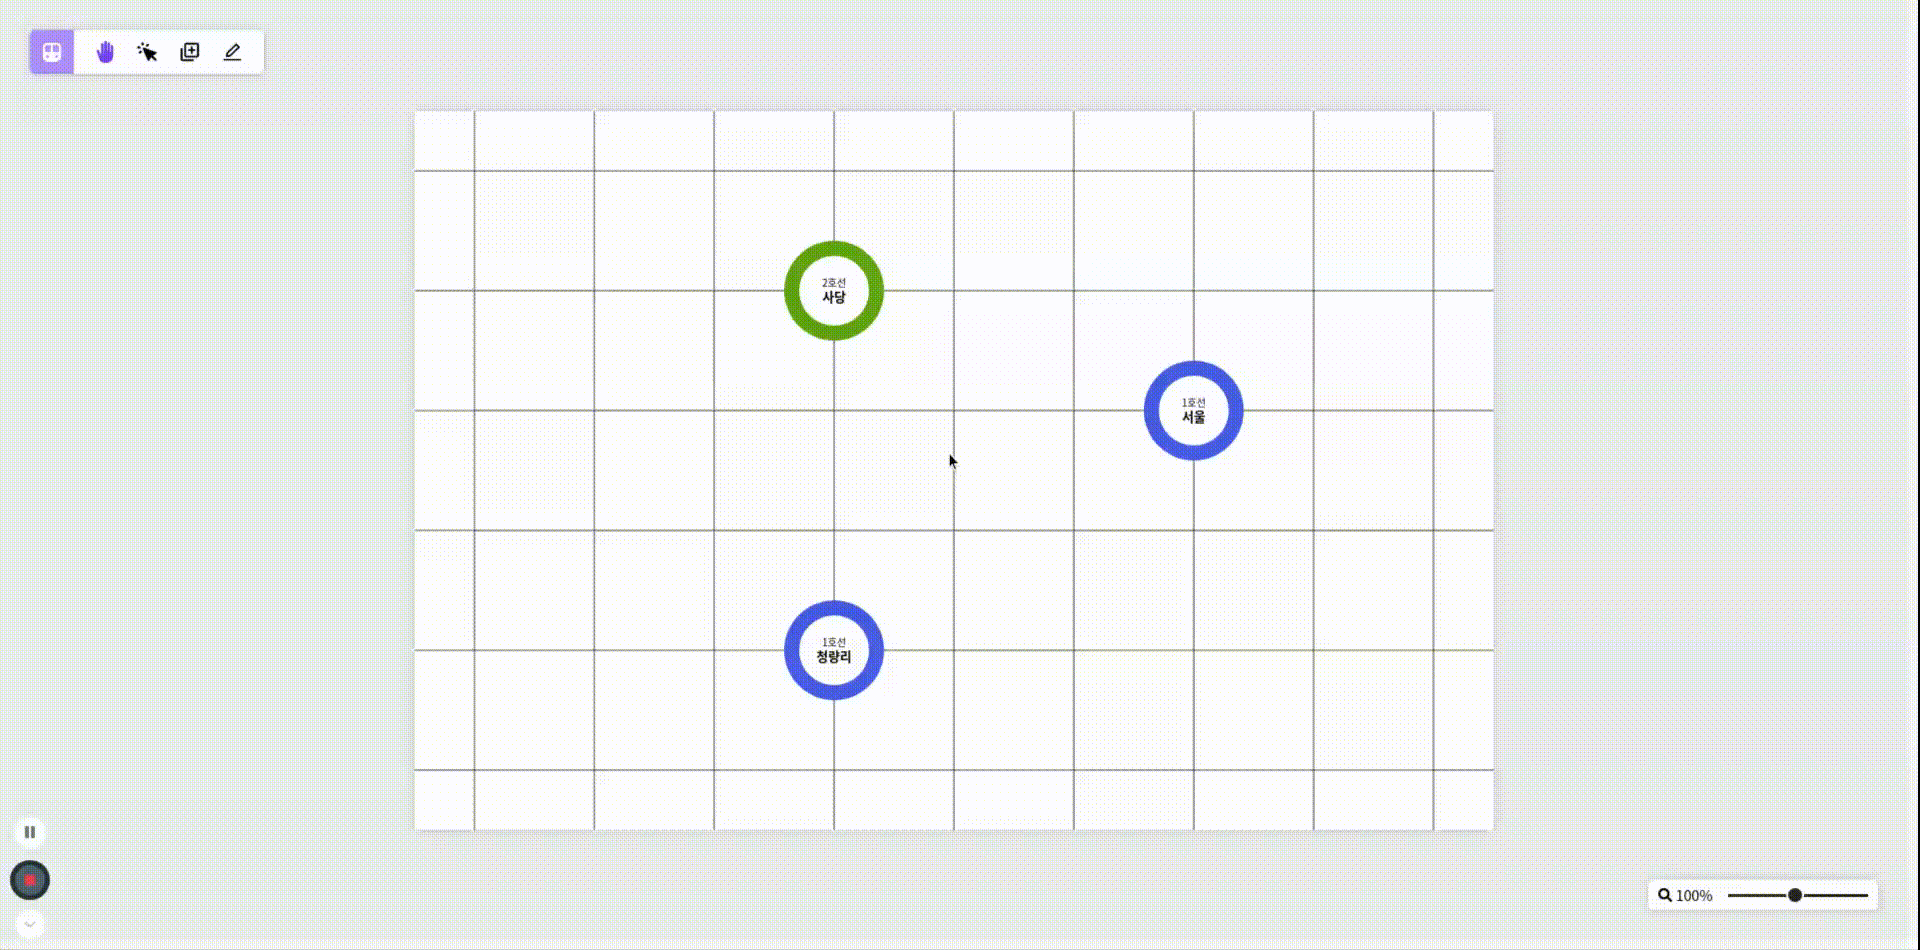 train-map-visualizer-side-project-midterm-review-8.gif